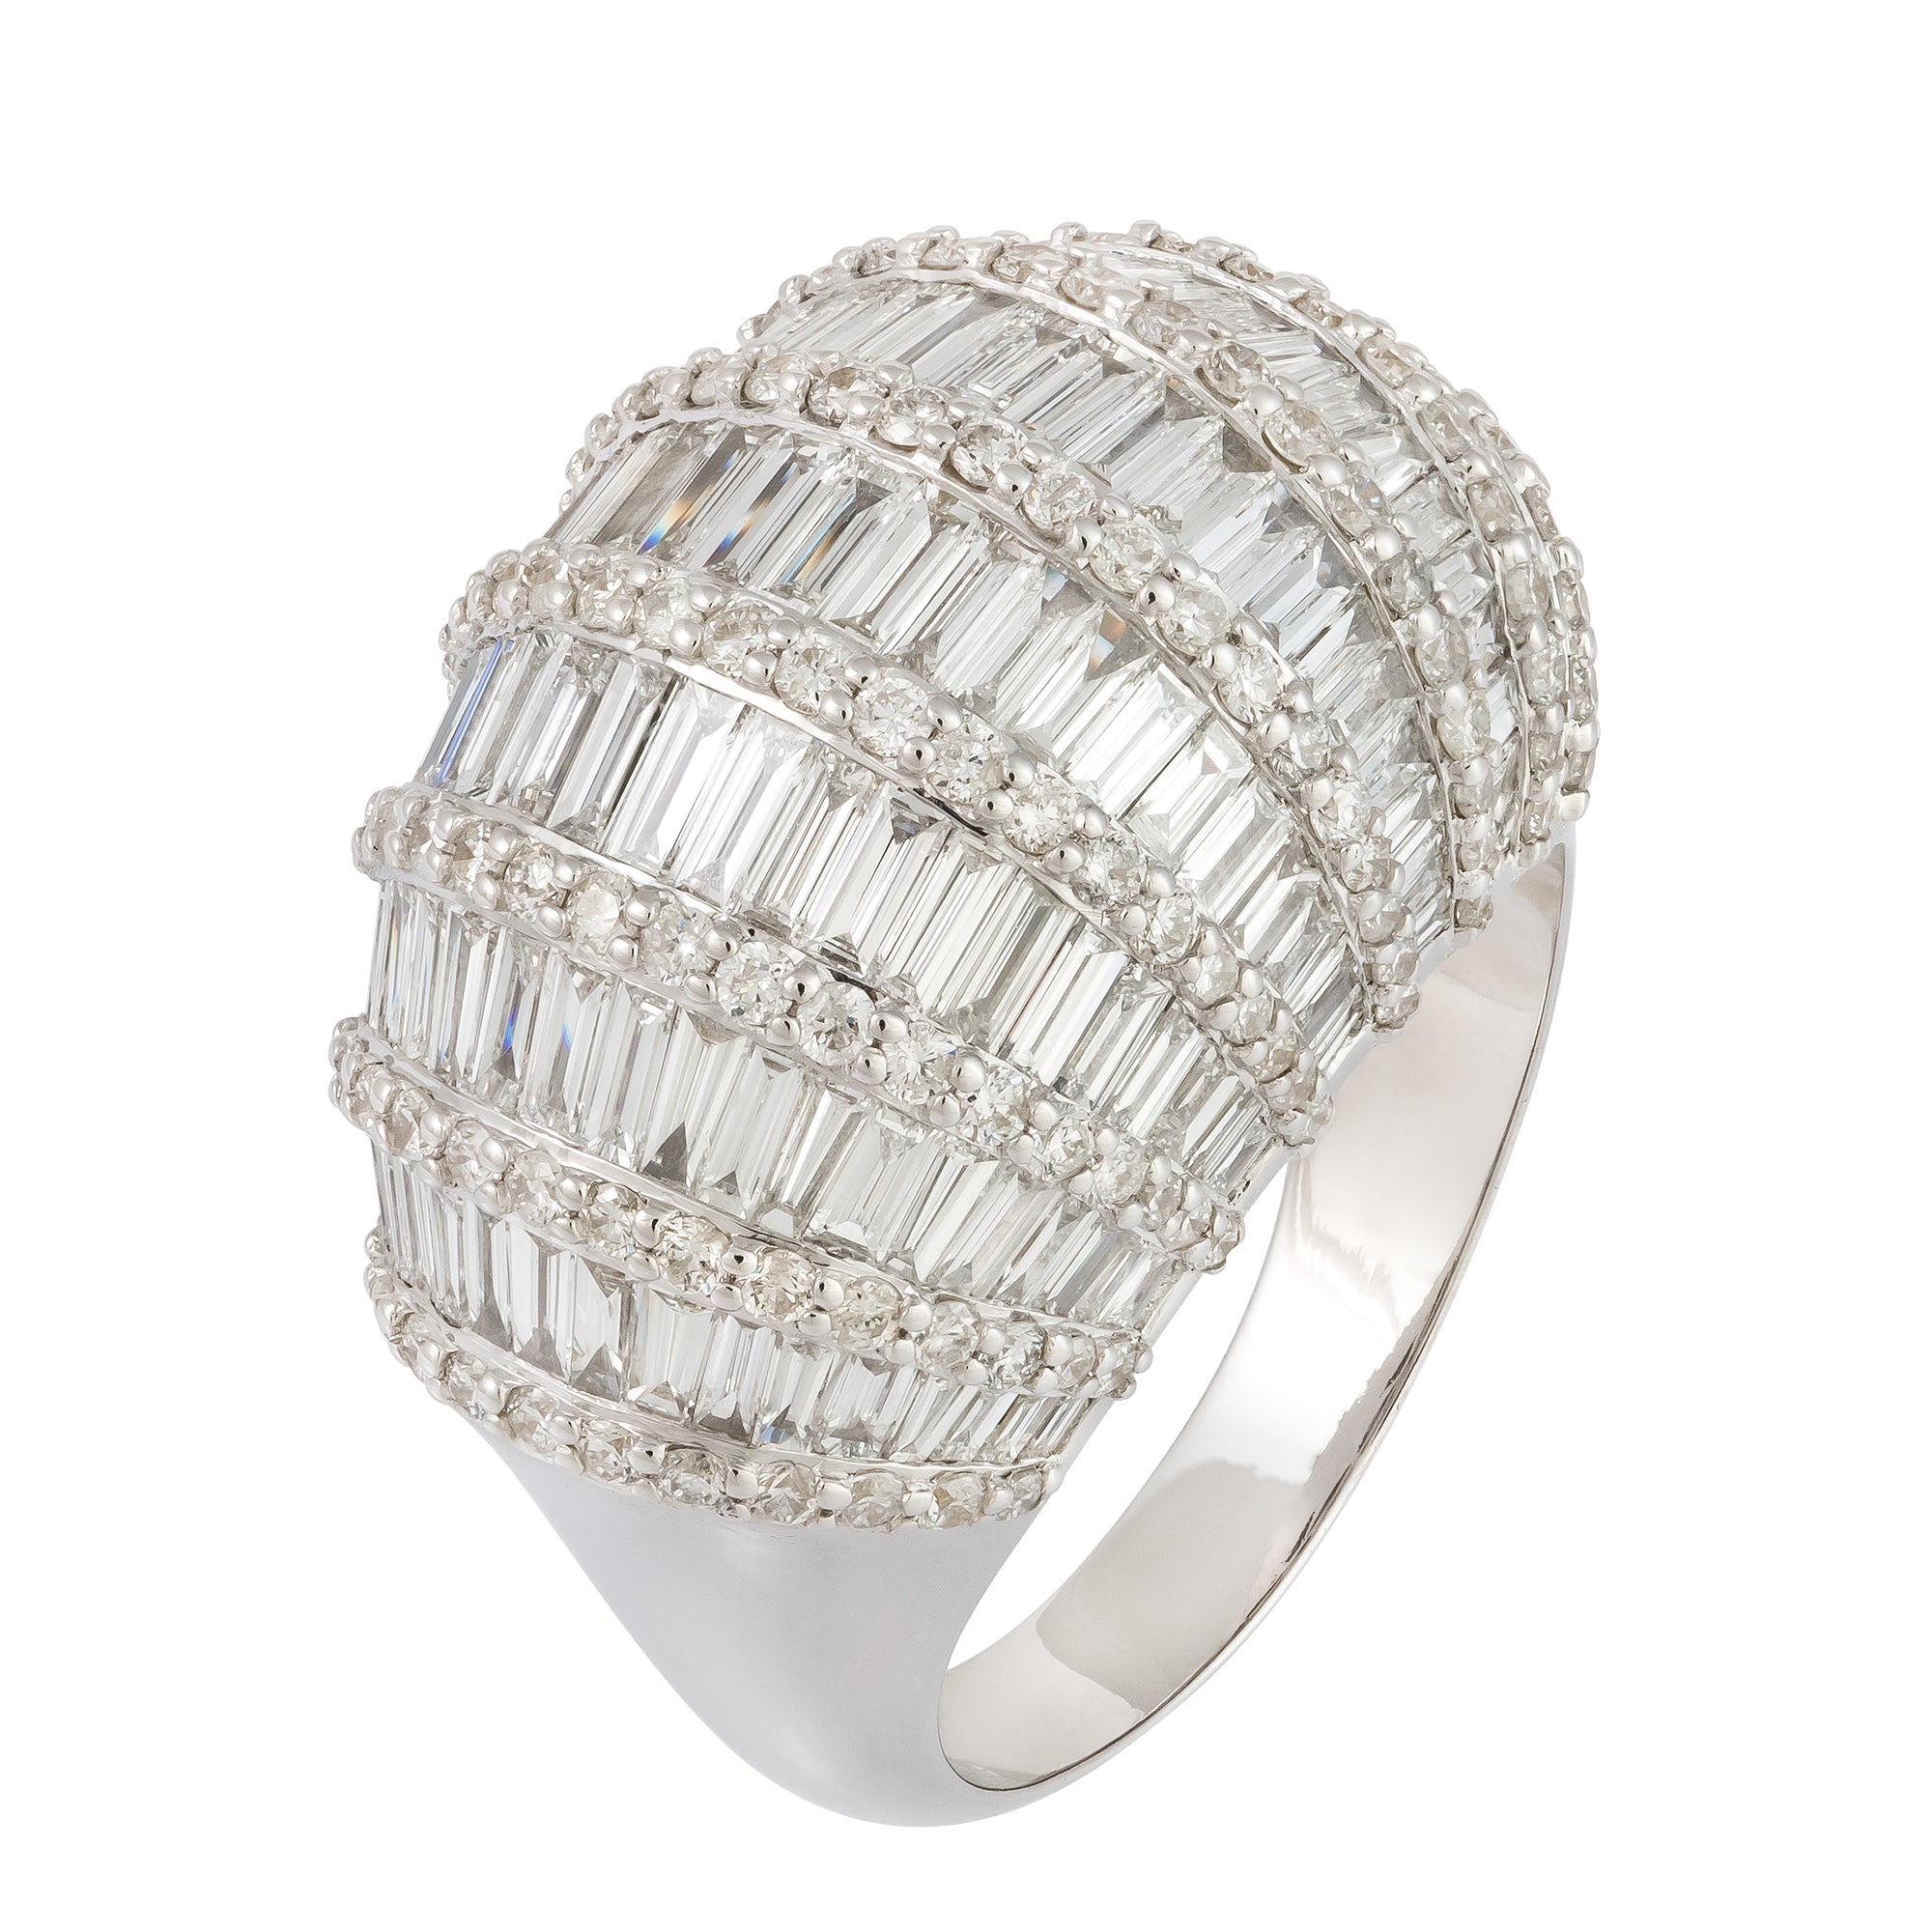 The Diamond Dome Ring- 40% OFF!